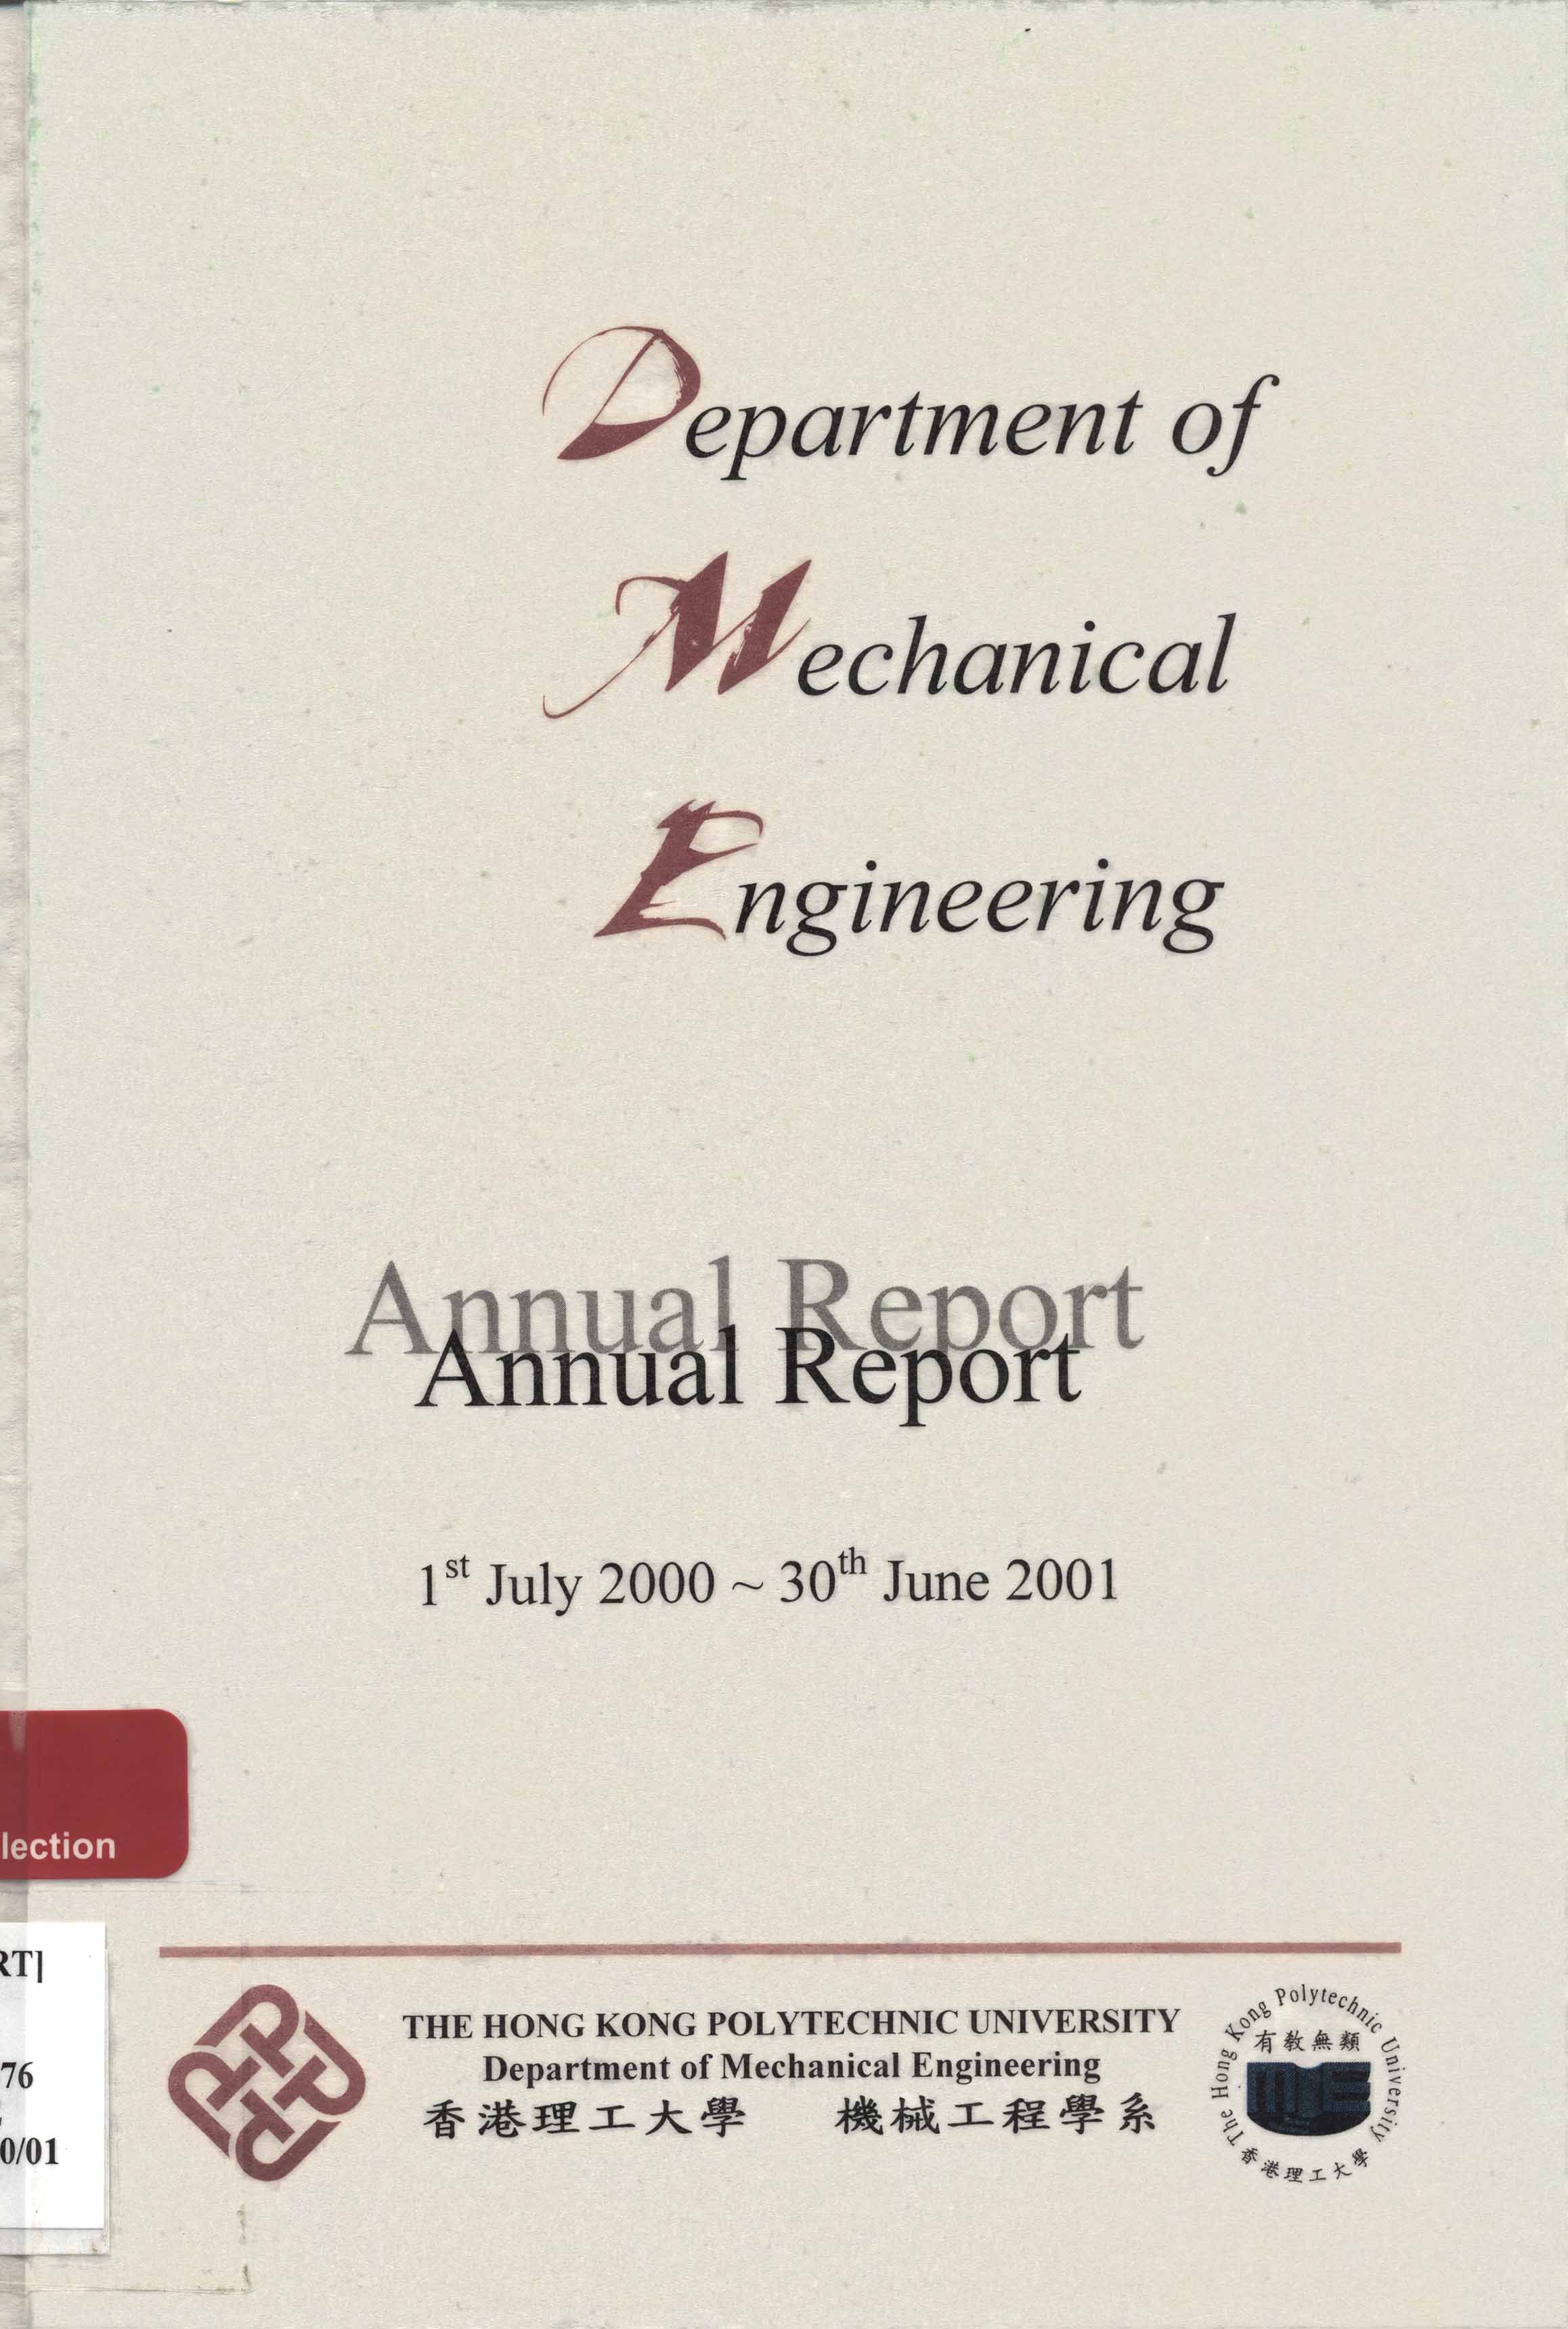 Hong Kong Polytechnic University. Dept. of Mechanical Engineering - Annual report 1st July 2000 ~ 30th June 2001